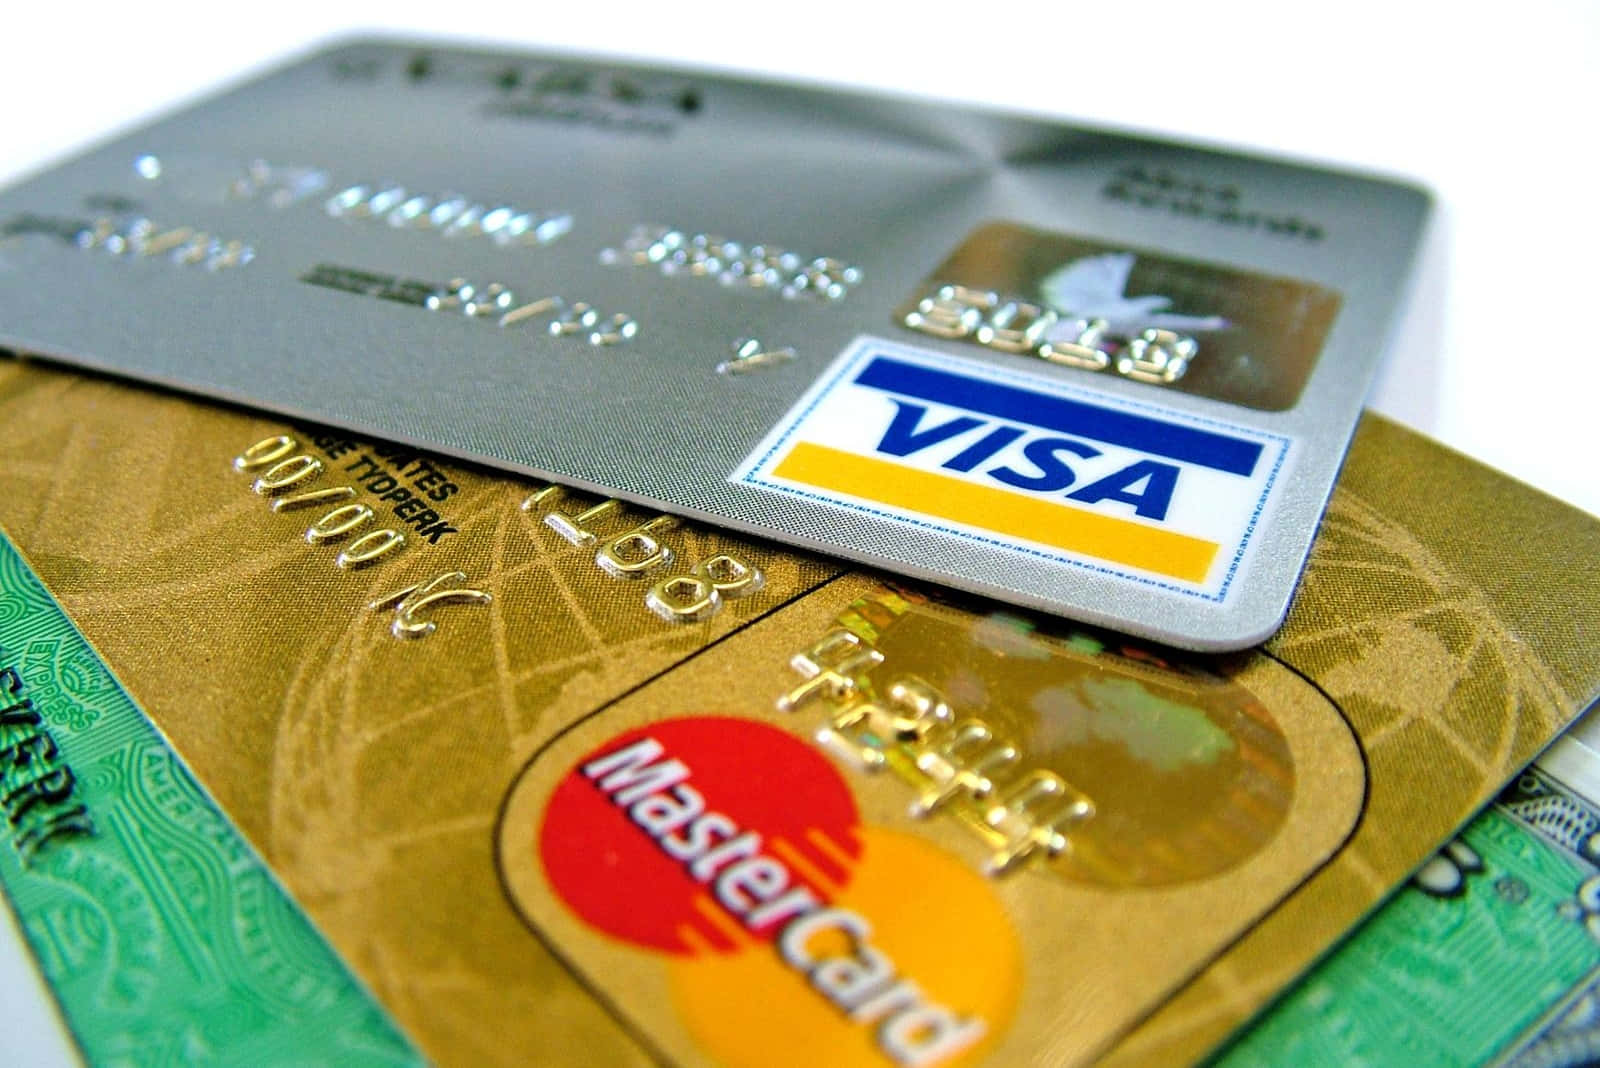 Your Credit Card Making Financials Transactions Easier